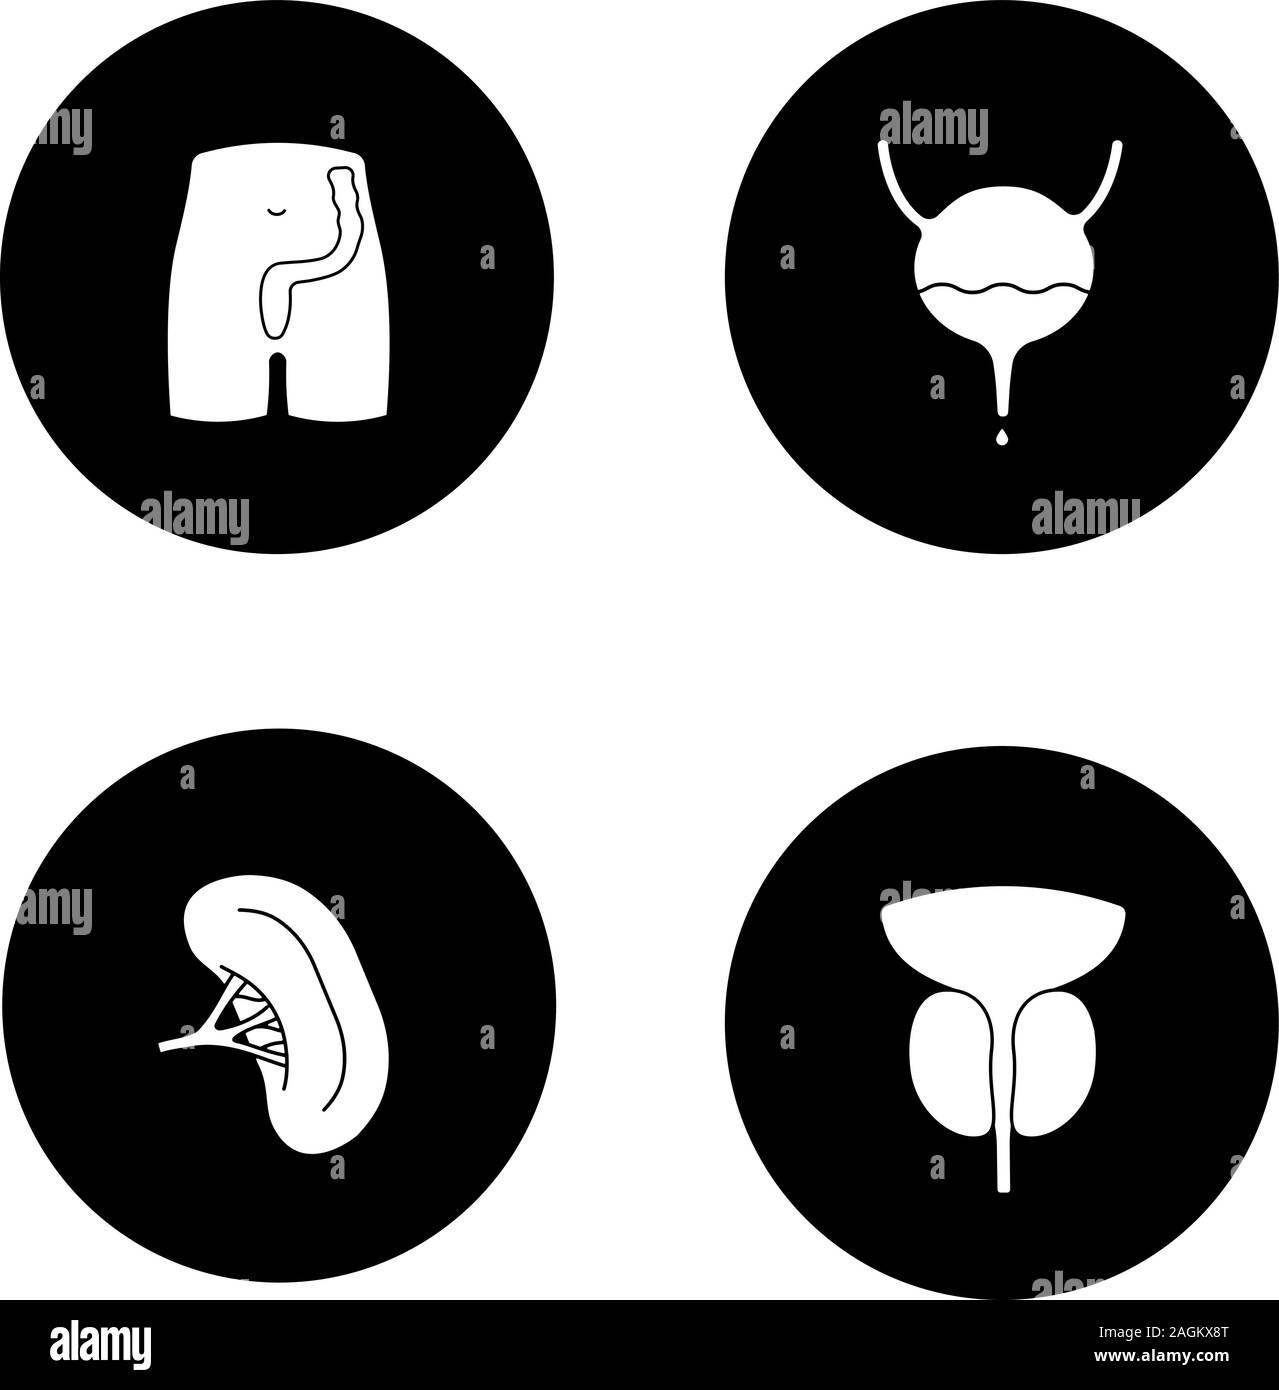 Internal organs glyph icons set. Rectum and anus, urinary bladder, spleen, prostate gland. Vector white silhouettes illustrations in black circles Stock Vector